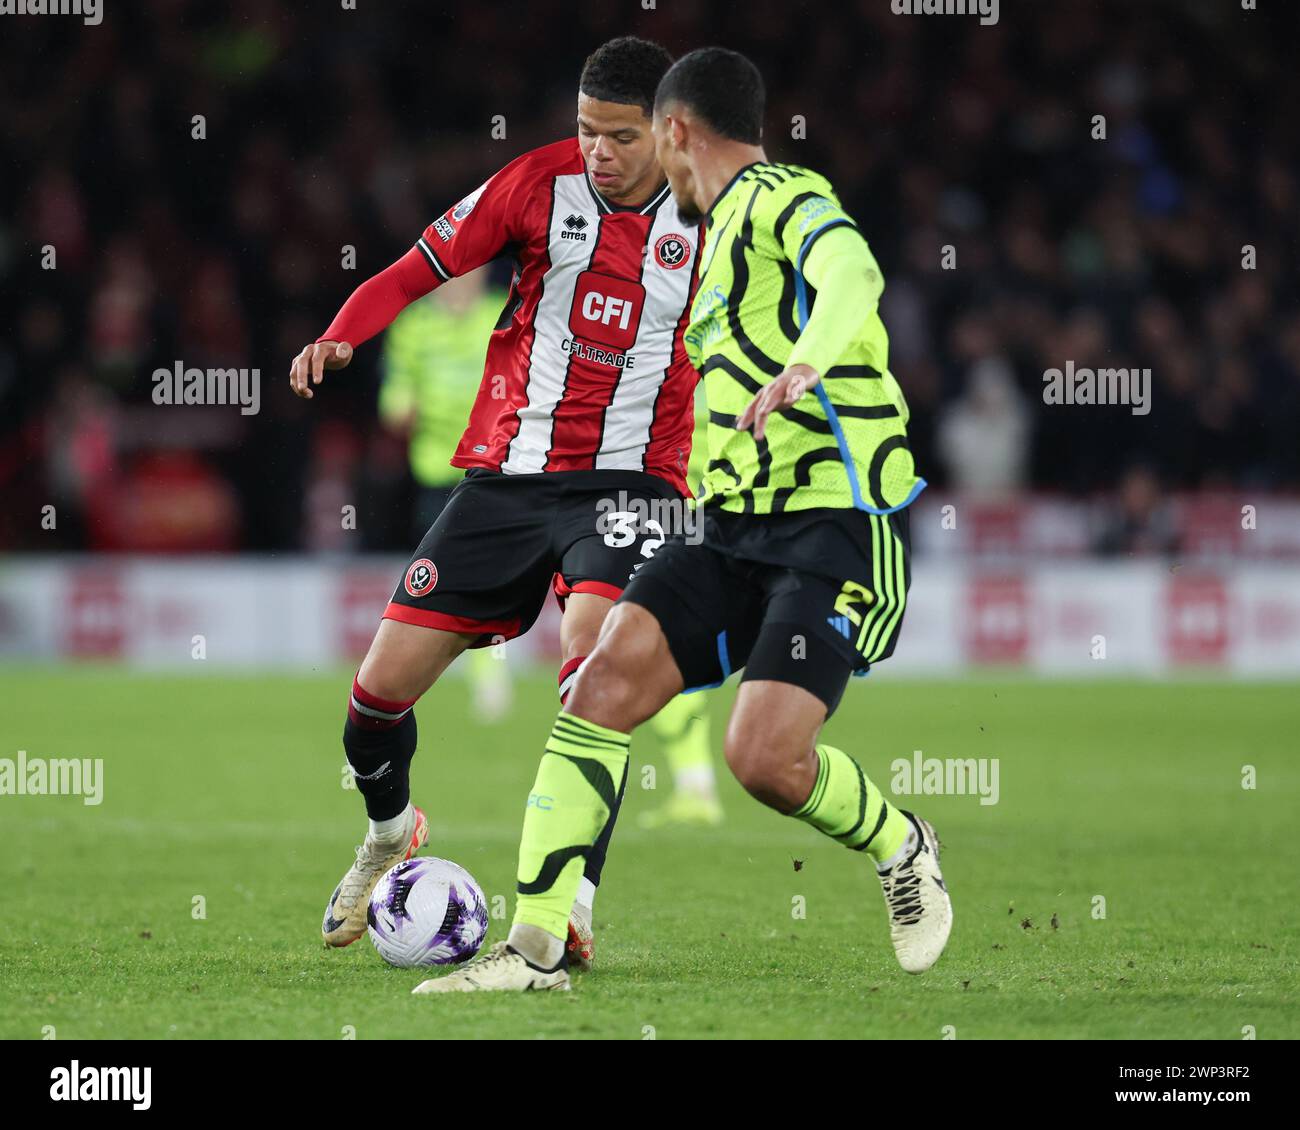 SHEFFIELD, ENGLAND - MARCH 4: William Osula of Sheffield United and William Saliba of Arsenal during the Premier League match between Sheffield United and Arsenal FC at Bramall Lane on March 4, 2024 in Sheffield, England. (Photo by MB Media/MB Media) Stock Photo